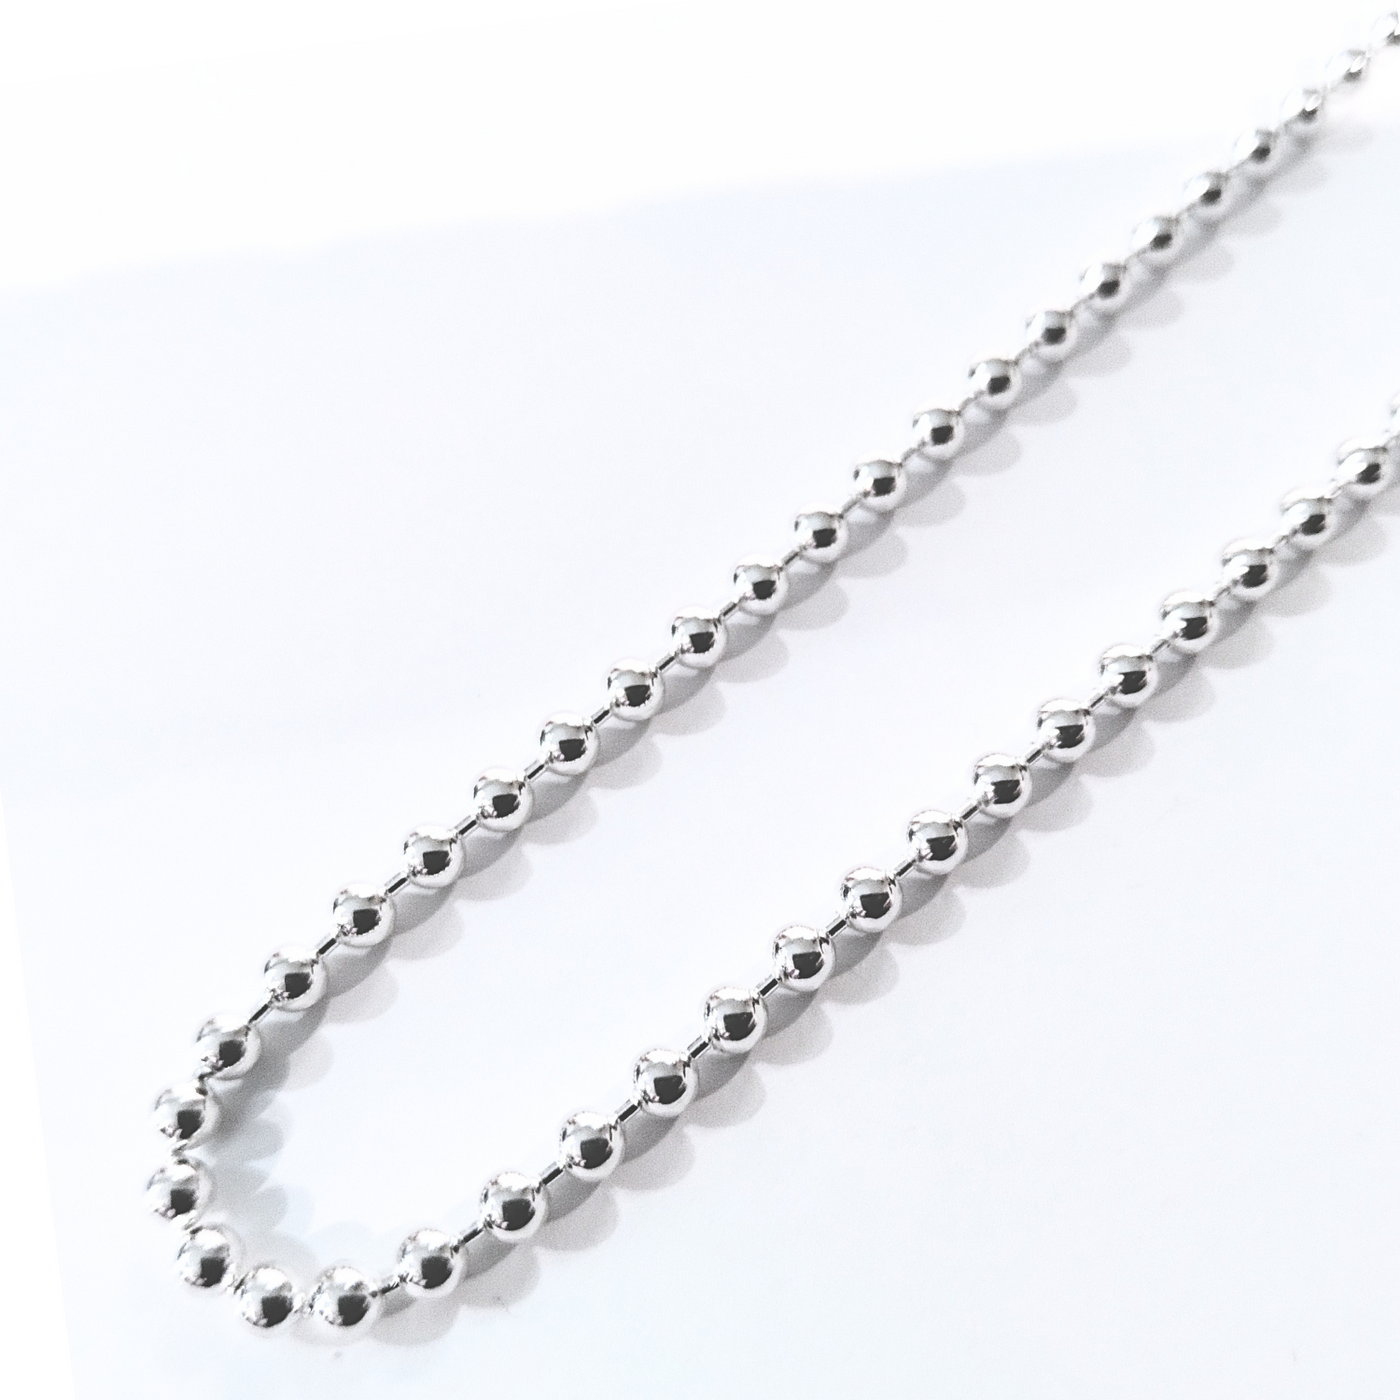 16" 3.0mm Bead Chain (Sterling Silver)